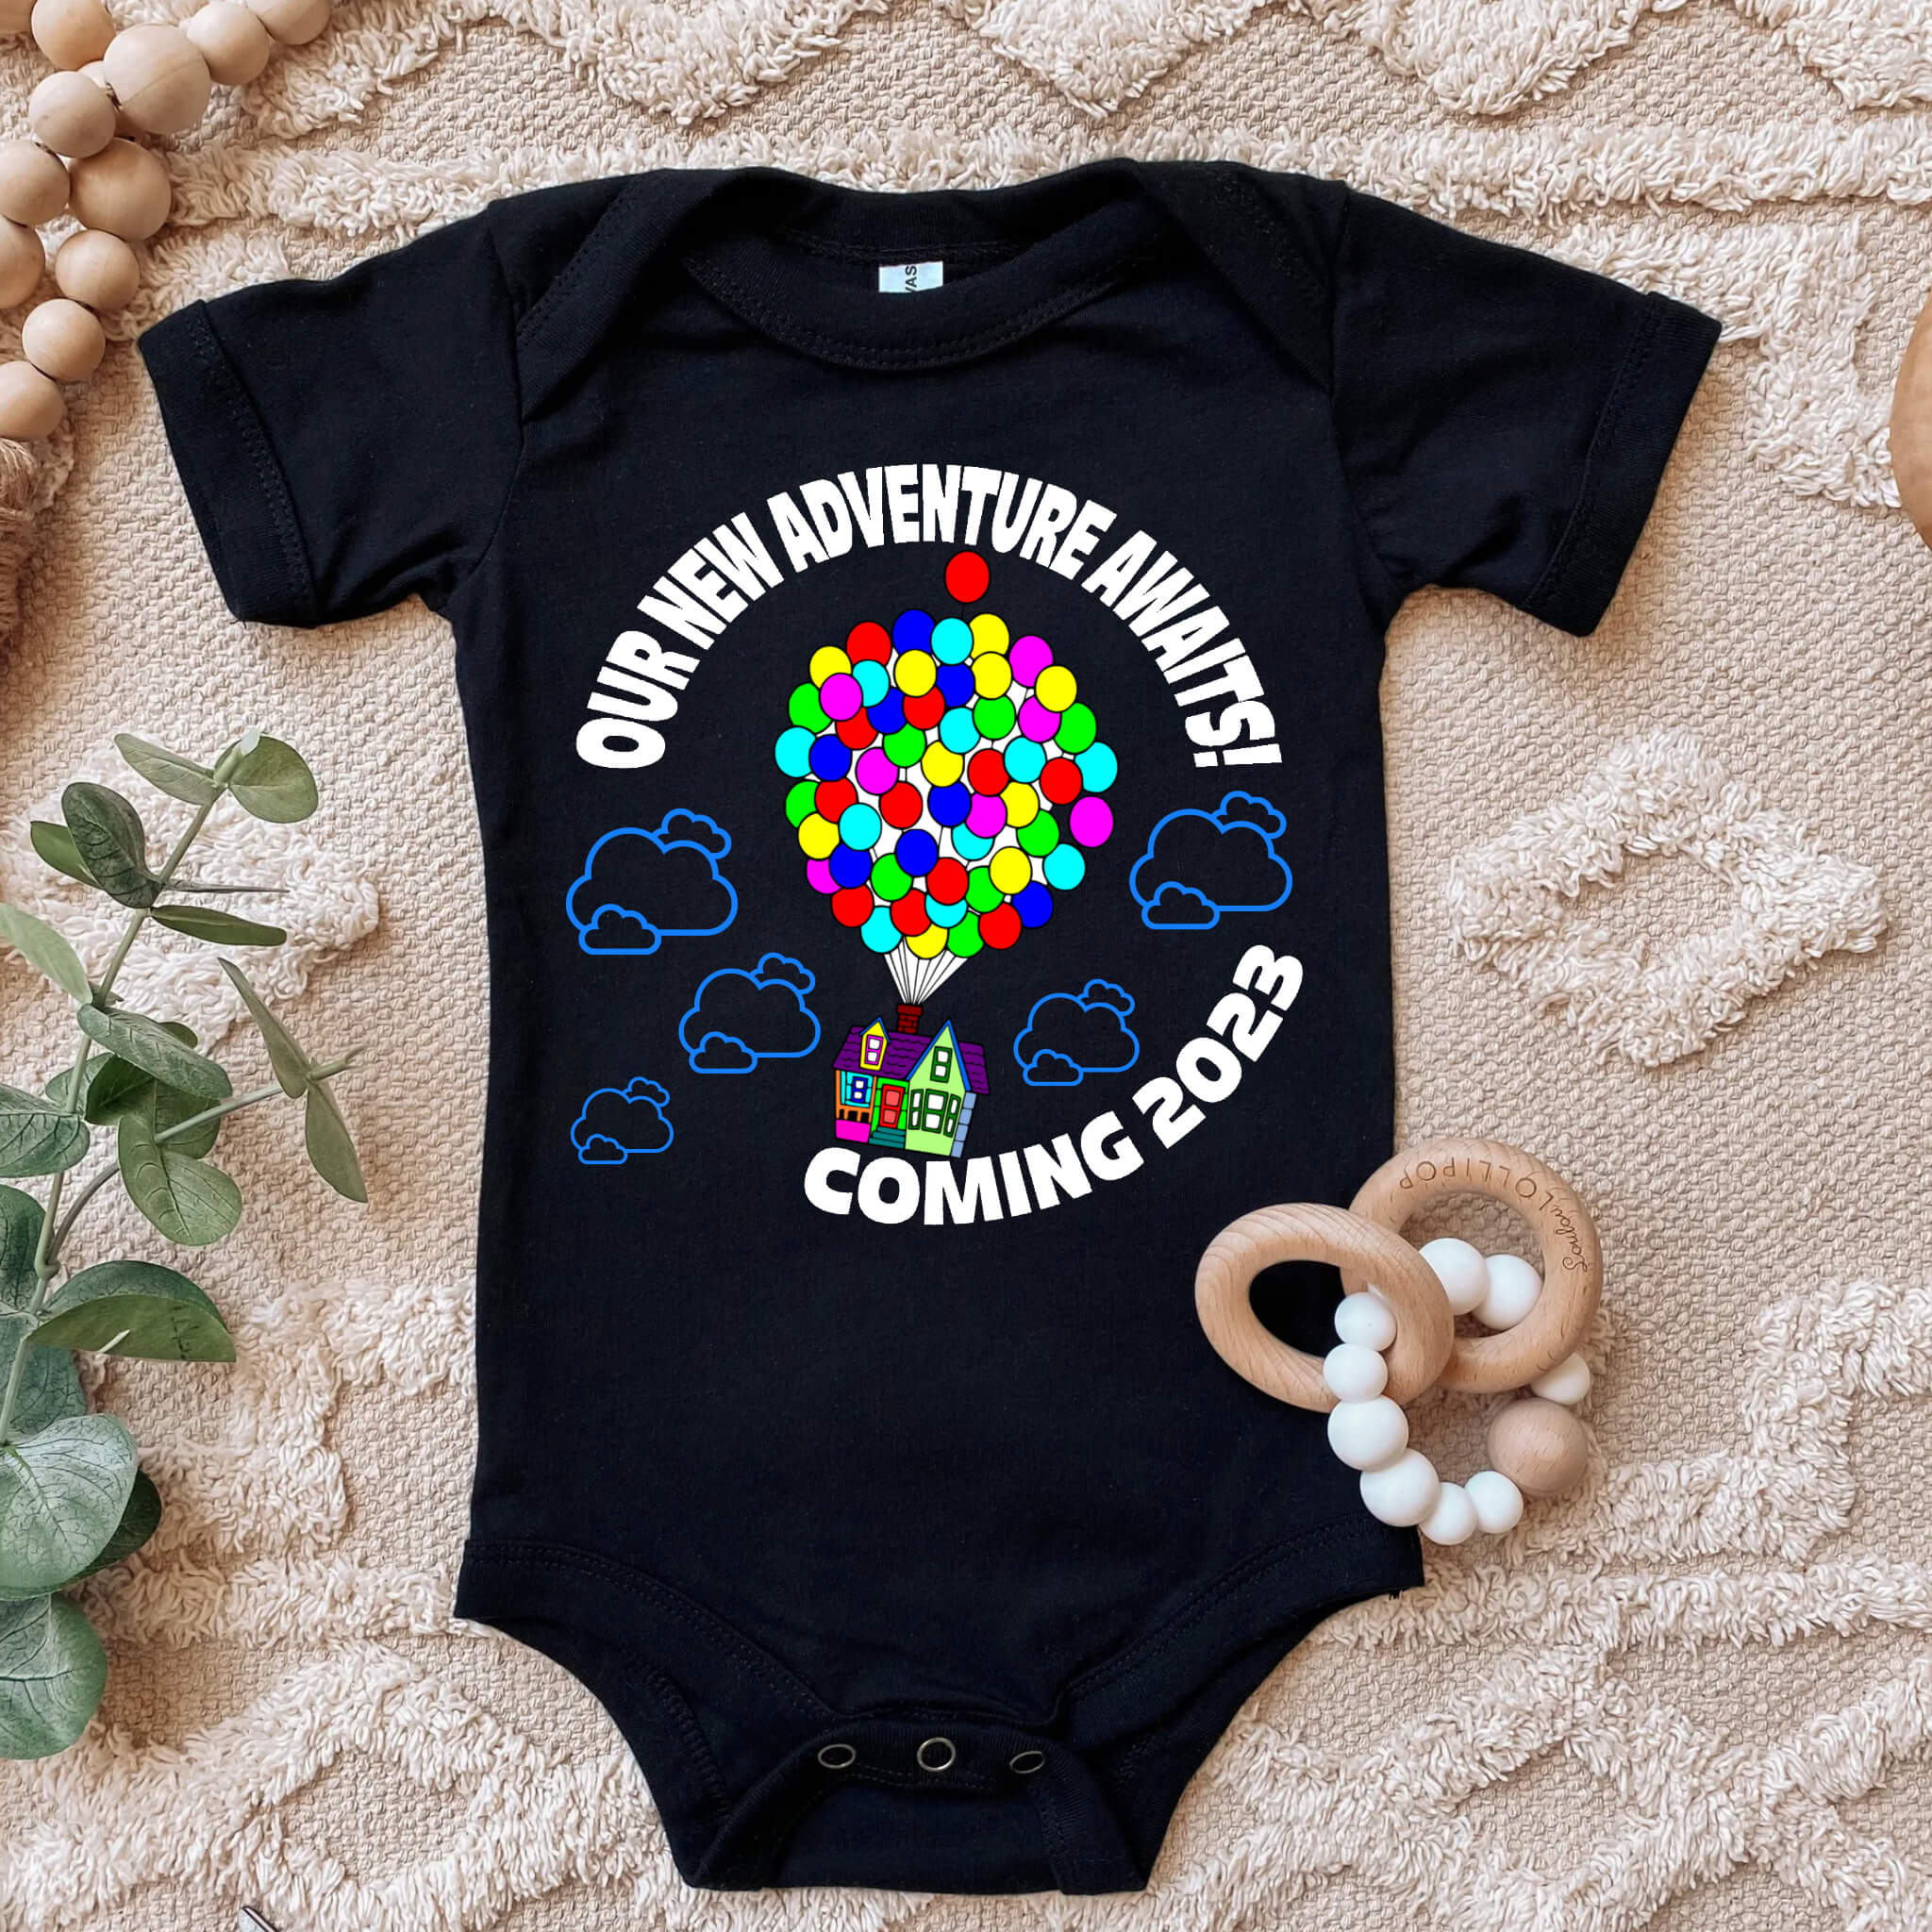 Personalized Pregnancy Announcement, Our New Adventure Awaits, Dad, Grandma, Grandpa, Auntie, Uncle To Be, Paradise Falls Ballon Onesie, Customized Baby Announcement Onesie, Animated Movie Characters Pregnancy Announcement